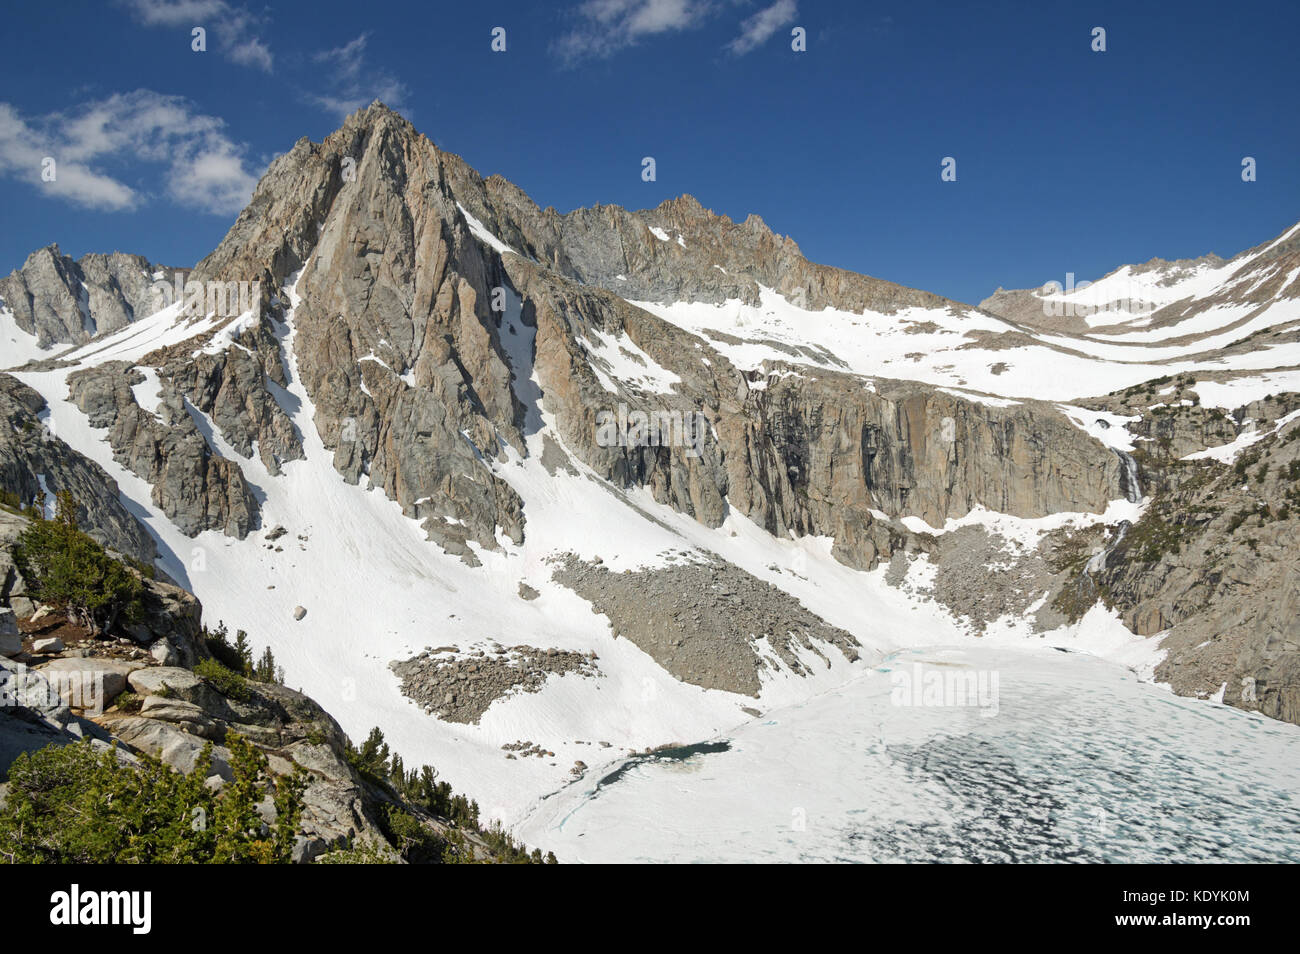 Picture Peak Mountain rises above a still mostly frozen Hungry Packer Lake in the Sierra Nevada Mountains of California Stock Photo